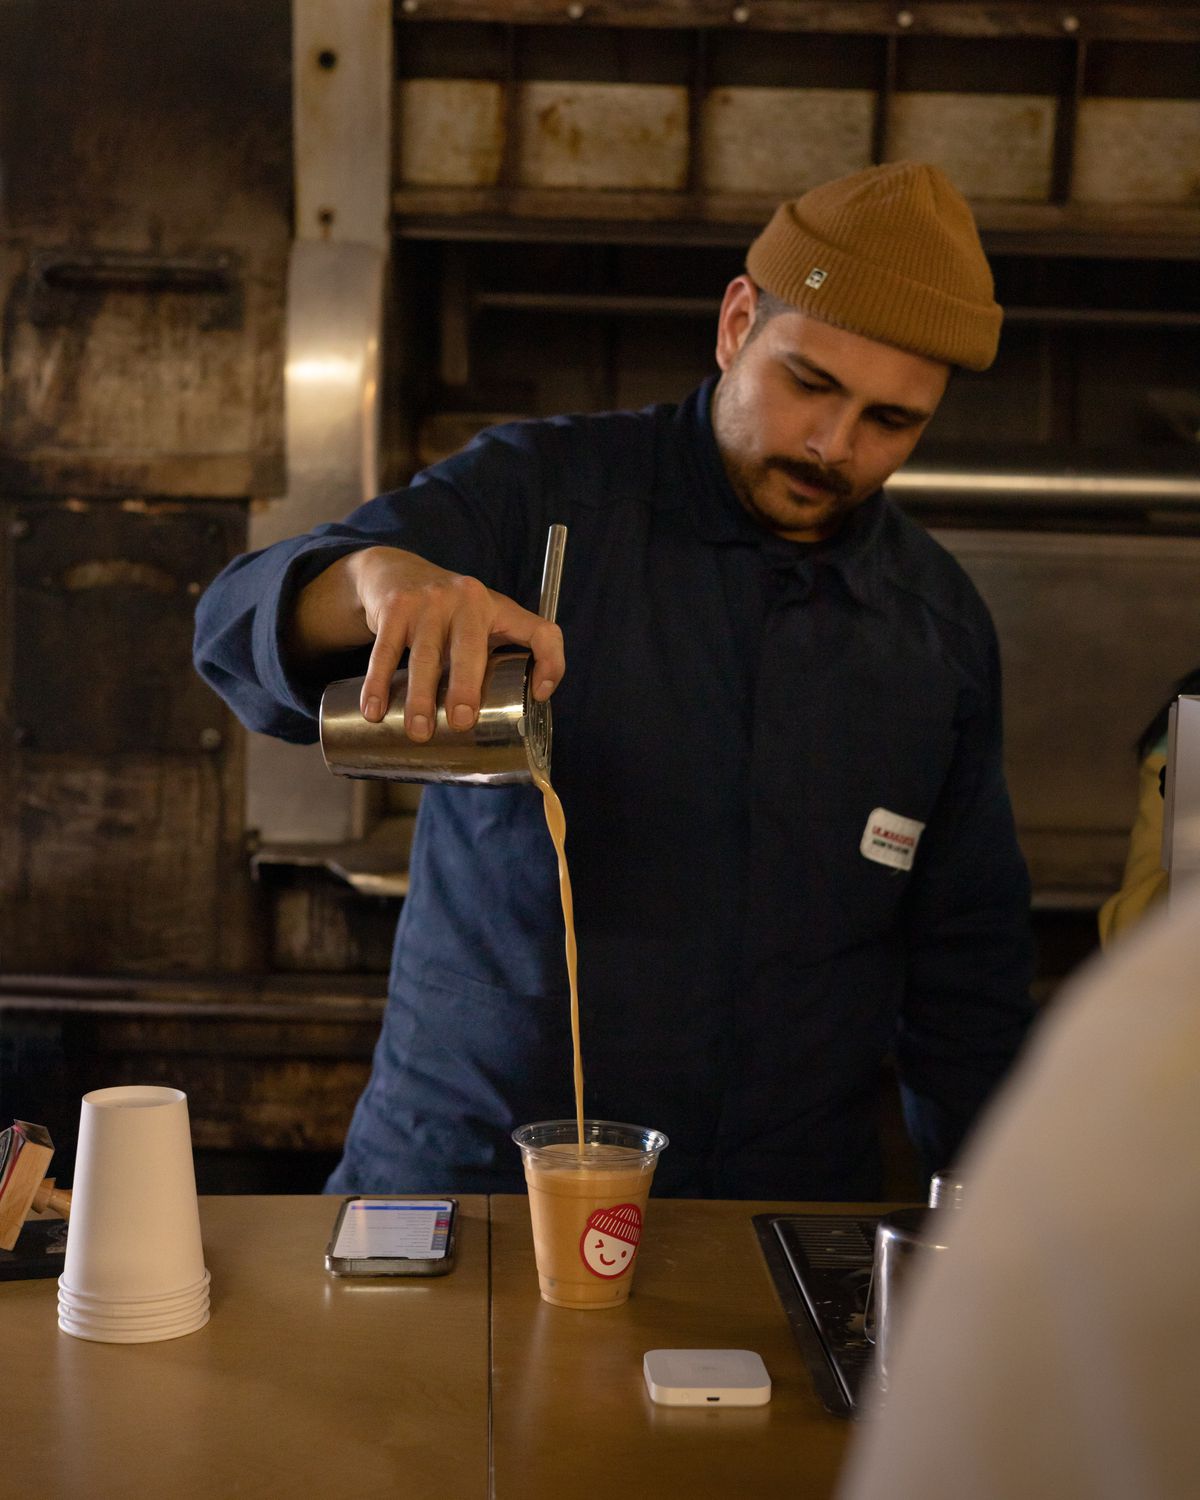 A man pours coffee into a cup.